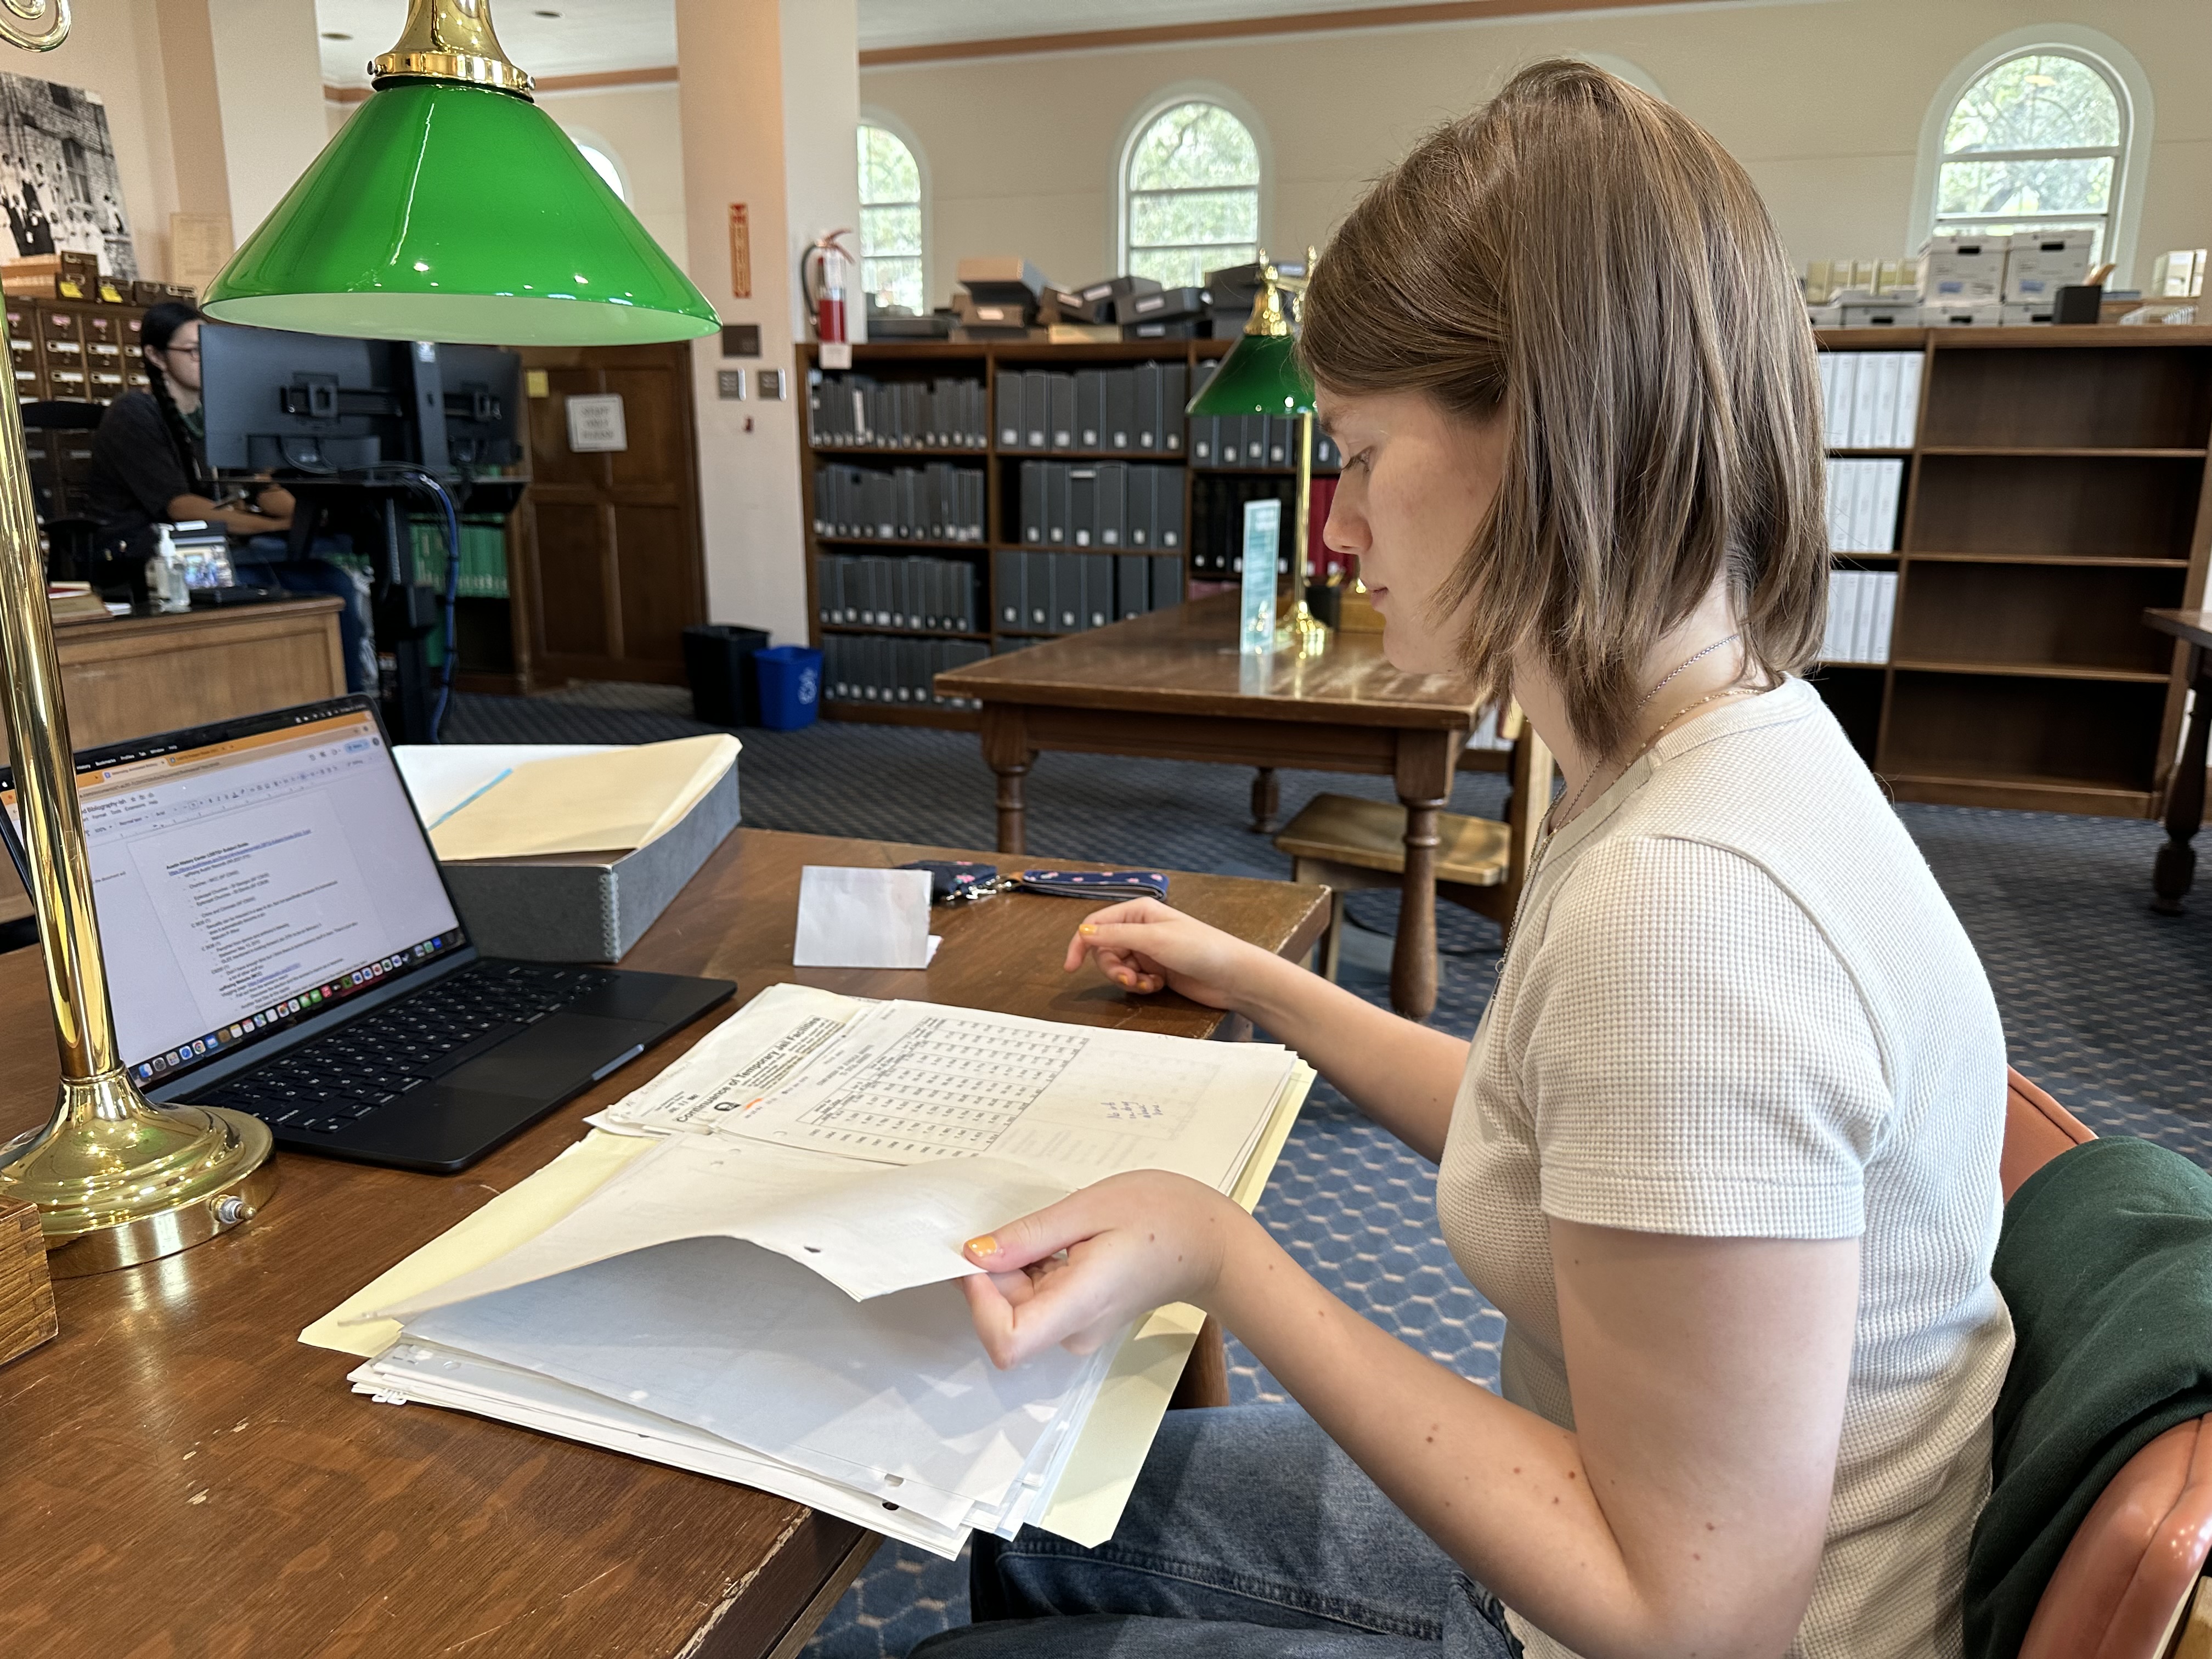 Tate Philpott '27 is conducting a Sharpe Action Research internship this summer with the St. David's History Project in her hometown of Austin, Texas. (Courtesy photo)